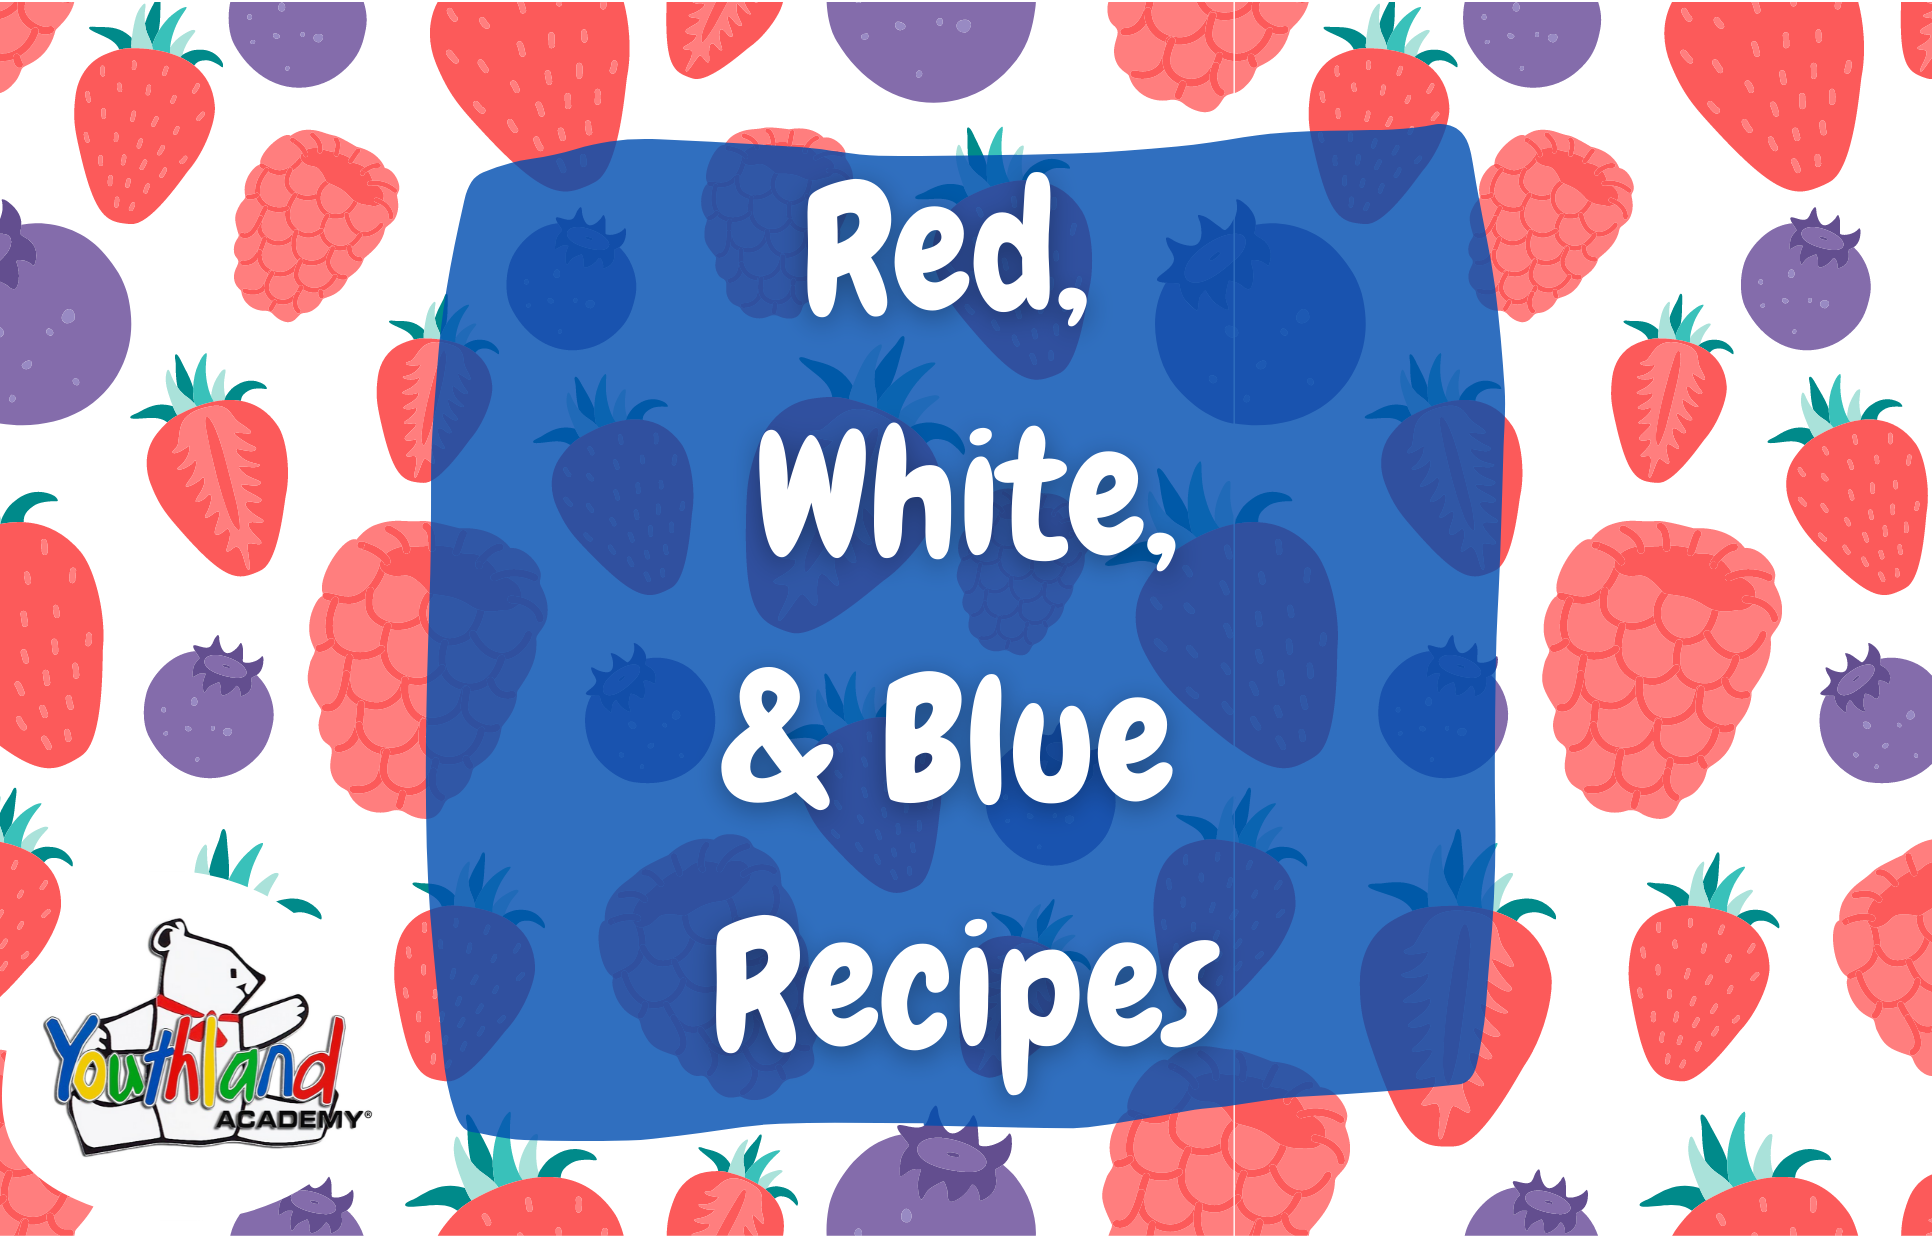 5 Red, White & Blue Recipes to Help You Celebrate the 4th